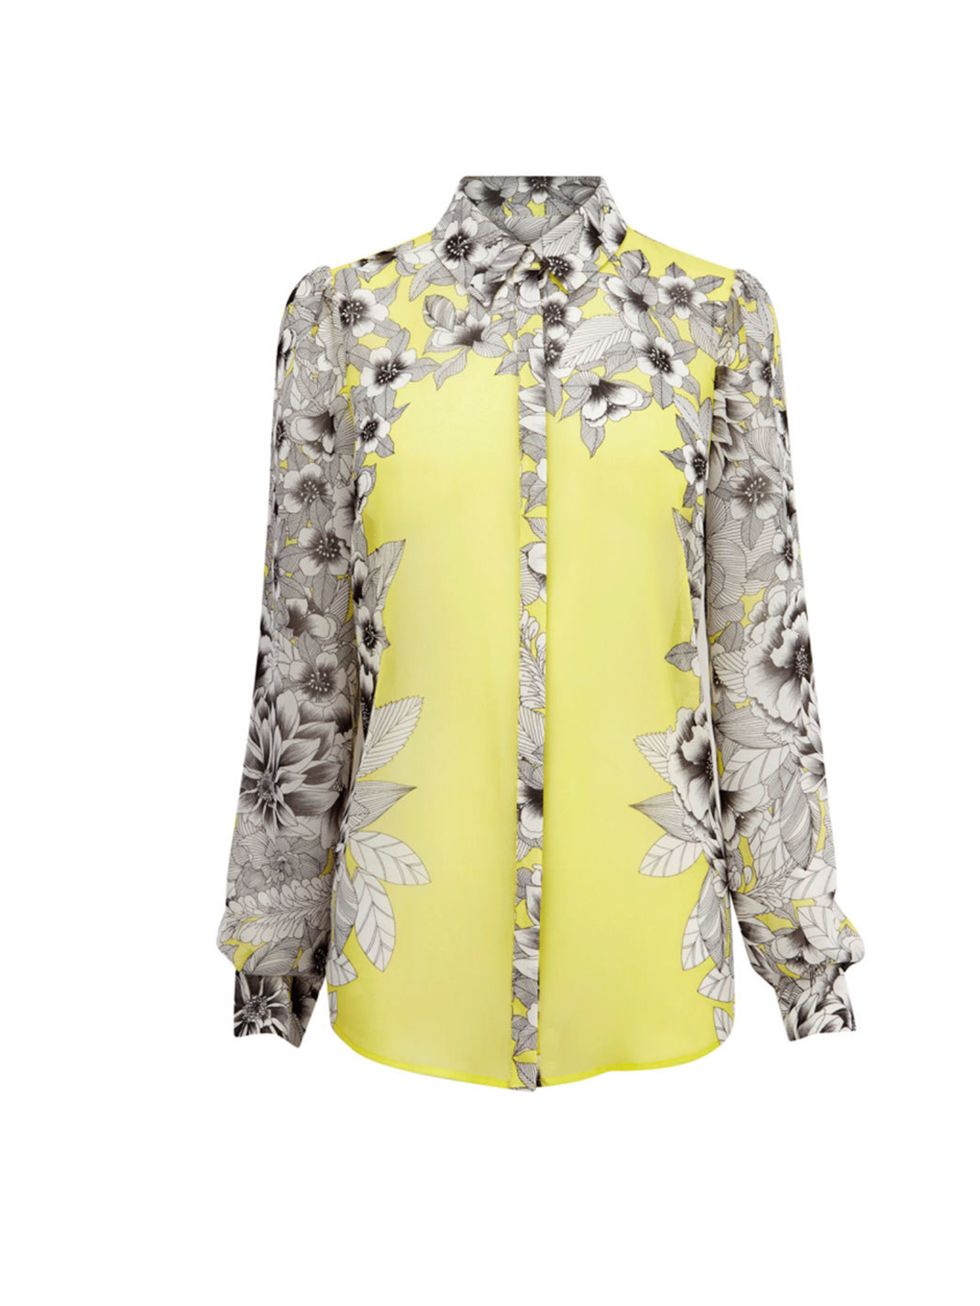 <p><a href="http://www.warehouse.co.uk///warehouse/fcp-product/307963">Warehouse</a> floral shirt, £45</p>